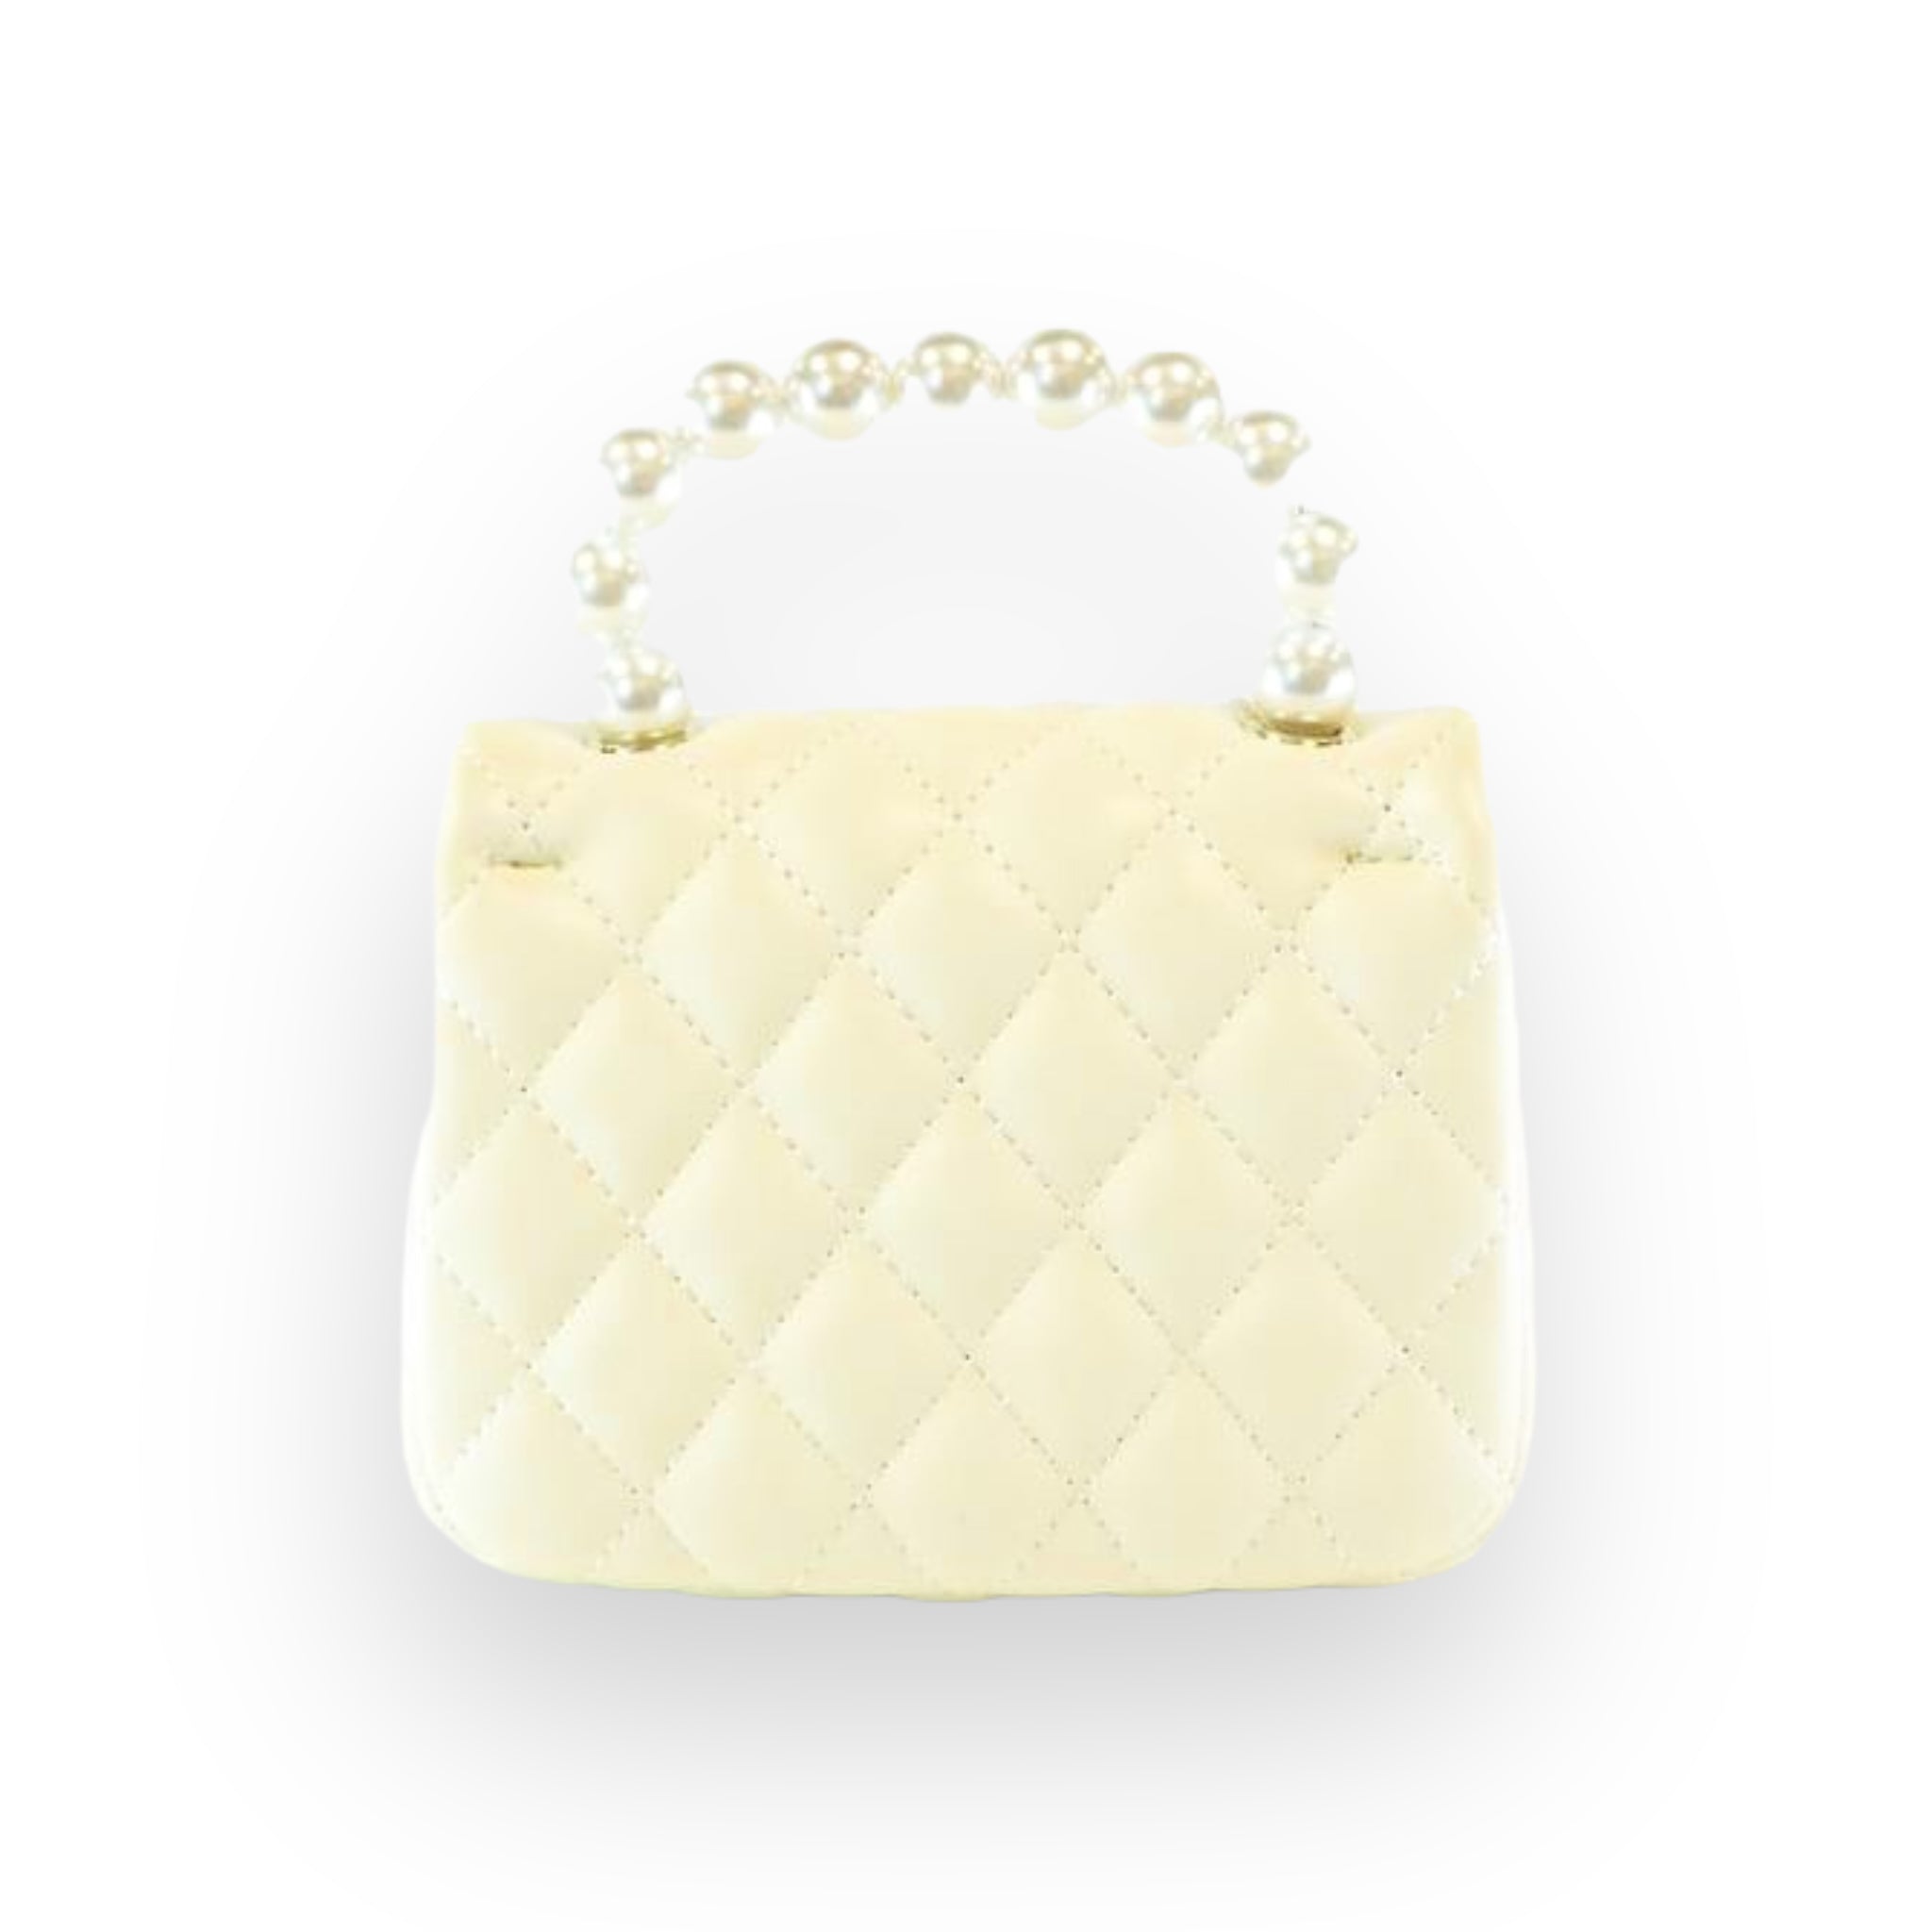 Pearl Handle Quilted Leather Purse w/ Charms - Cream